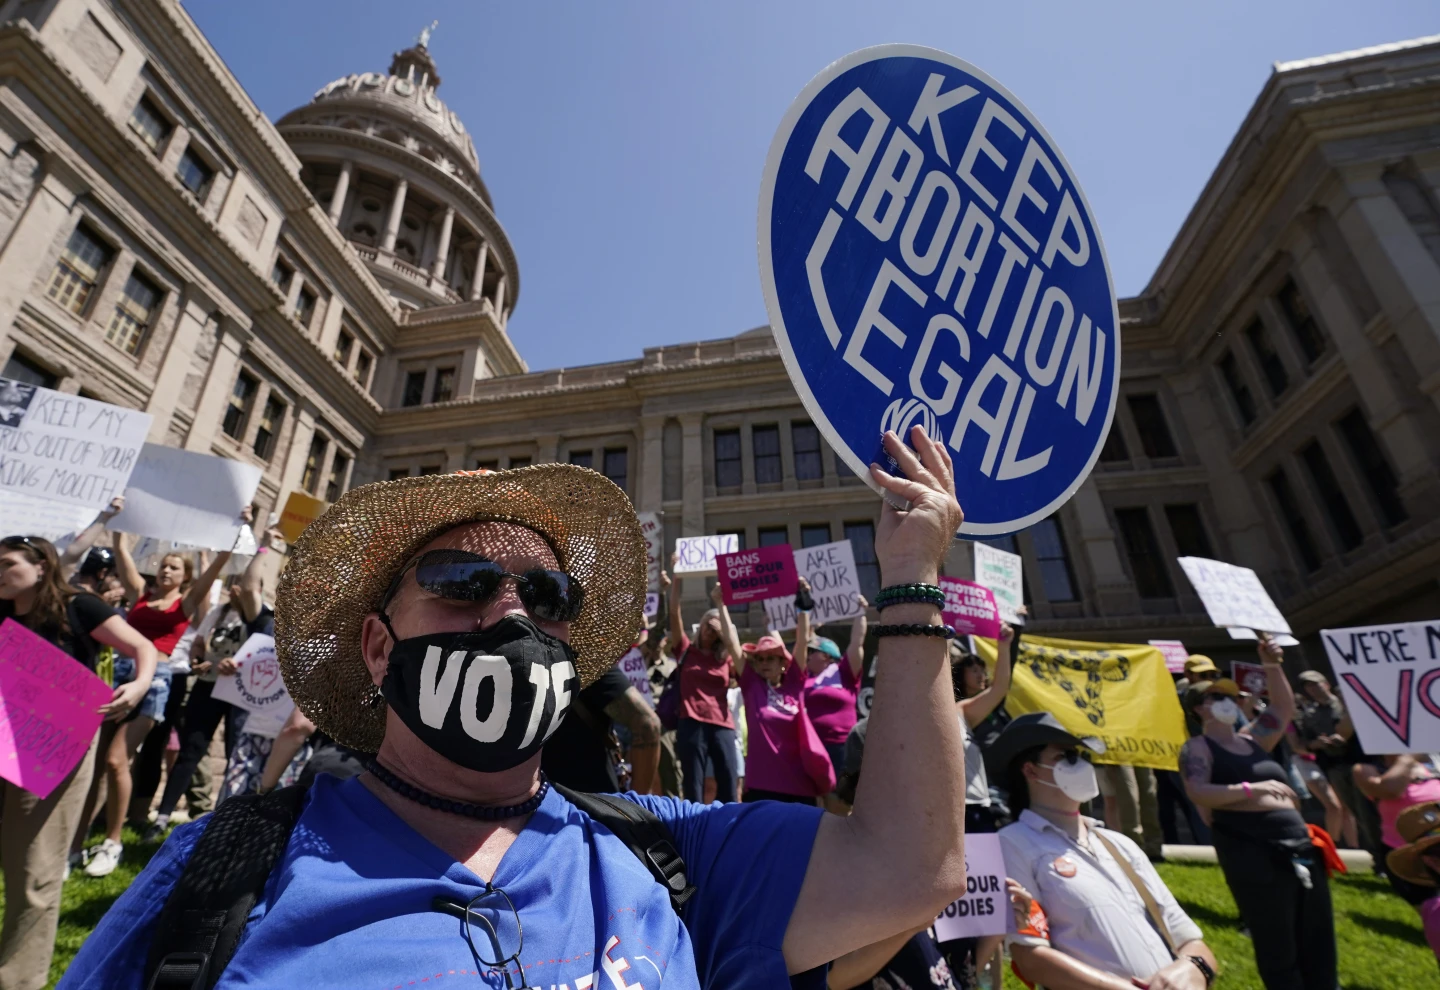 A Texas Judge Grants A Pregnant Woman Permission To Get An Abortion Despite The State’s Ban